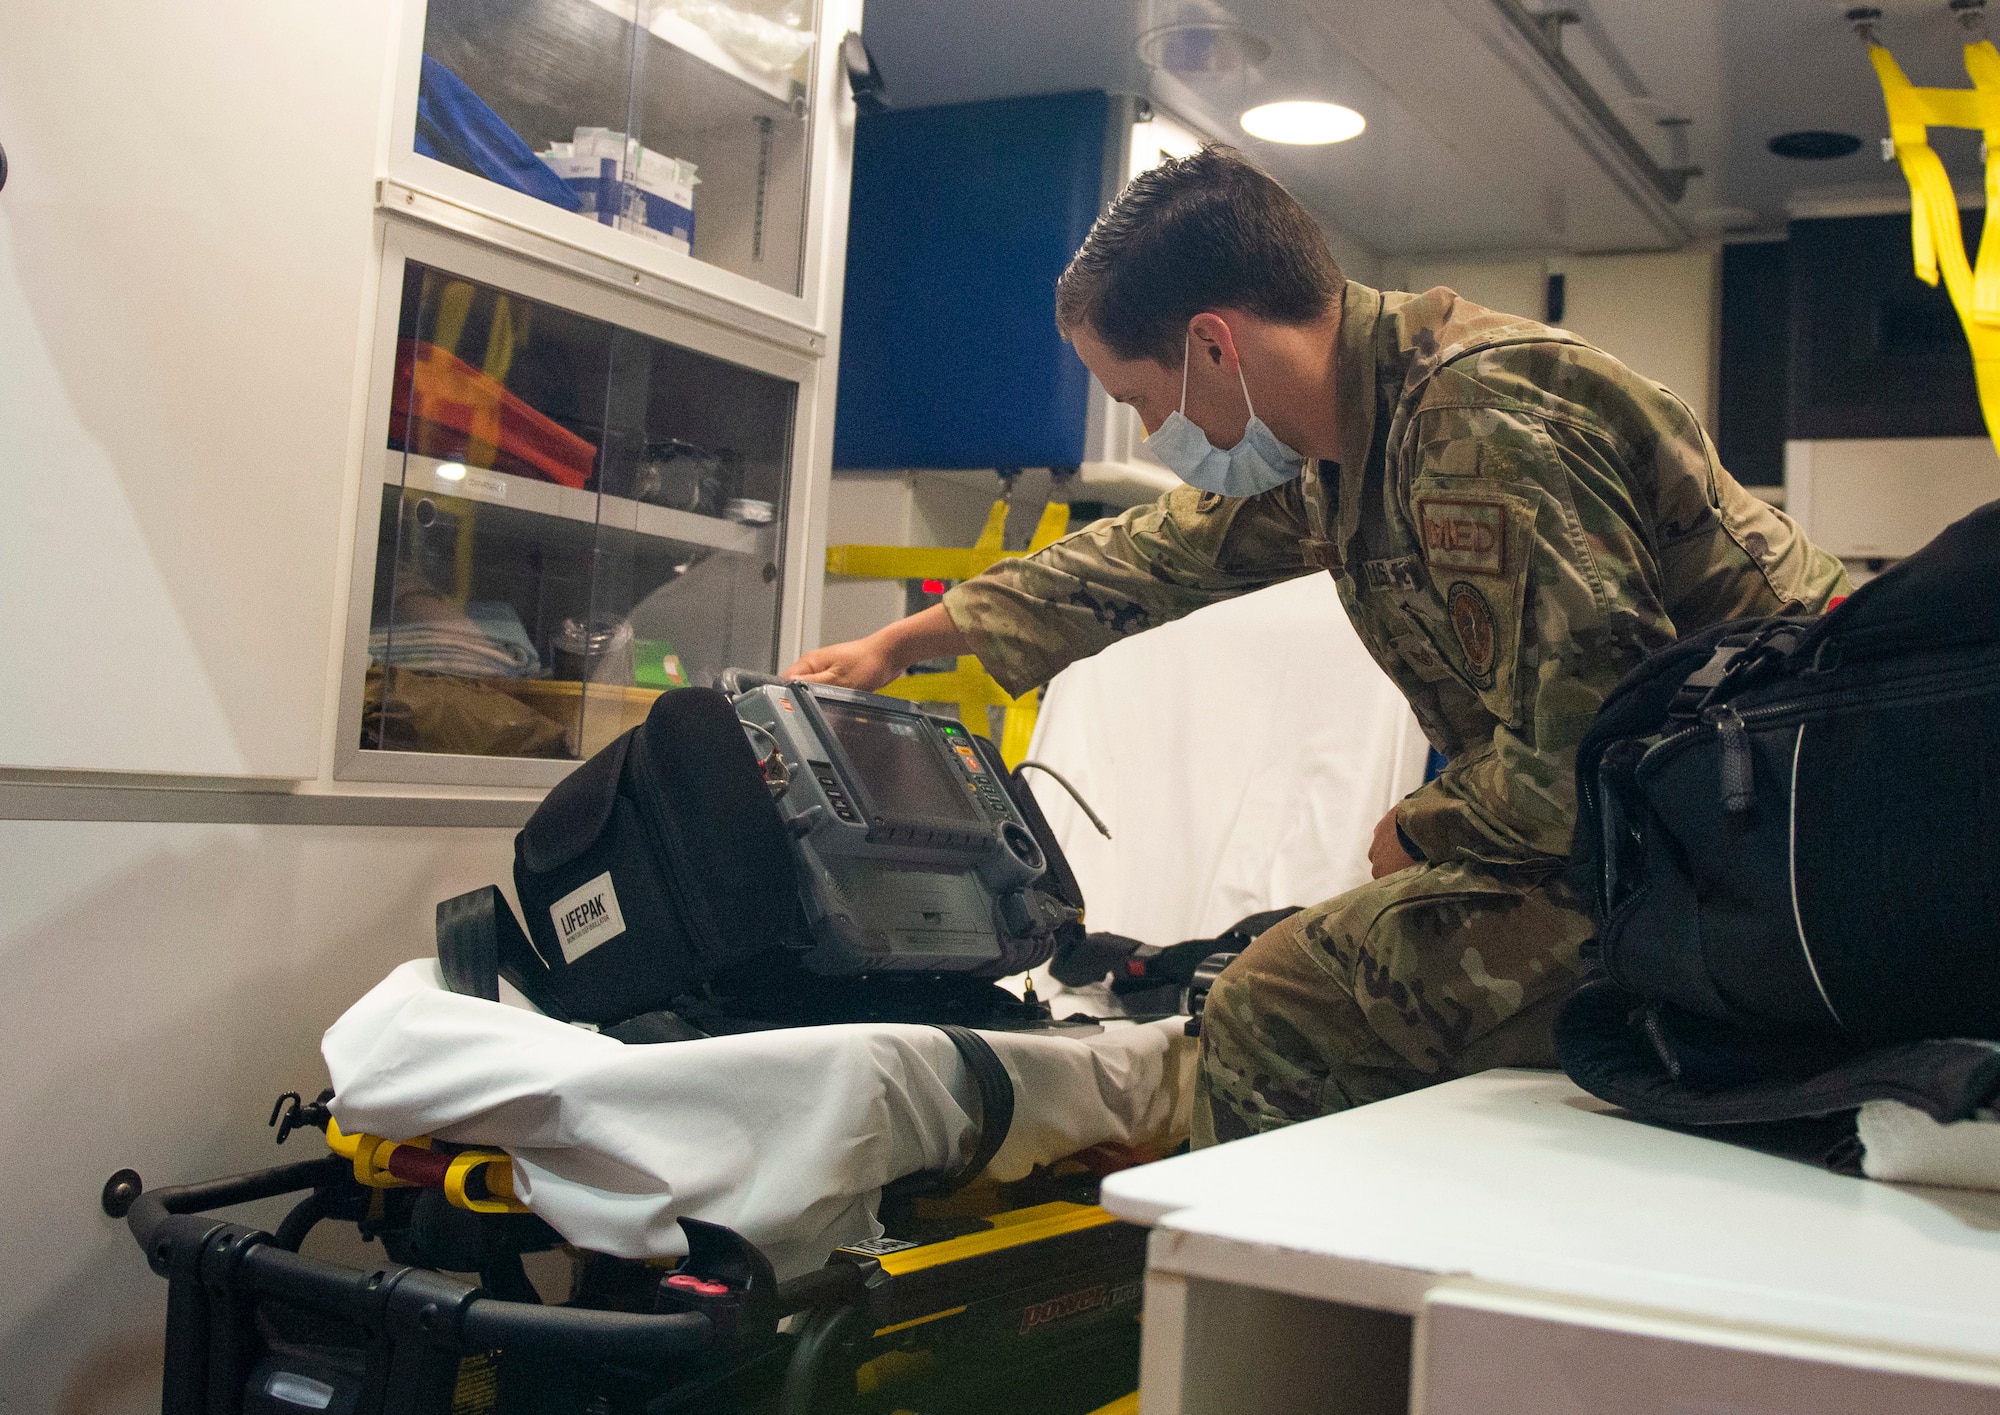 U.S. Air Force Staff Sgt. David Henderson, a paramedic with the 88th Medical Group, performs an inspection of equipment inside the ambulance outside the Wright-Patterson Air Force Base, Ohio Medical Center, April, 28, 2021. The medical center is open 24 hours a day with medical personnel standing by to treat anyone that comes through their door. (U.S. Air Force photo by Wesley Farnsworth)